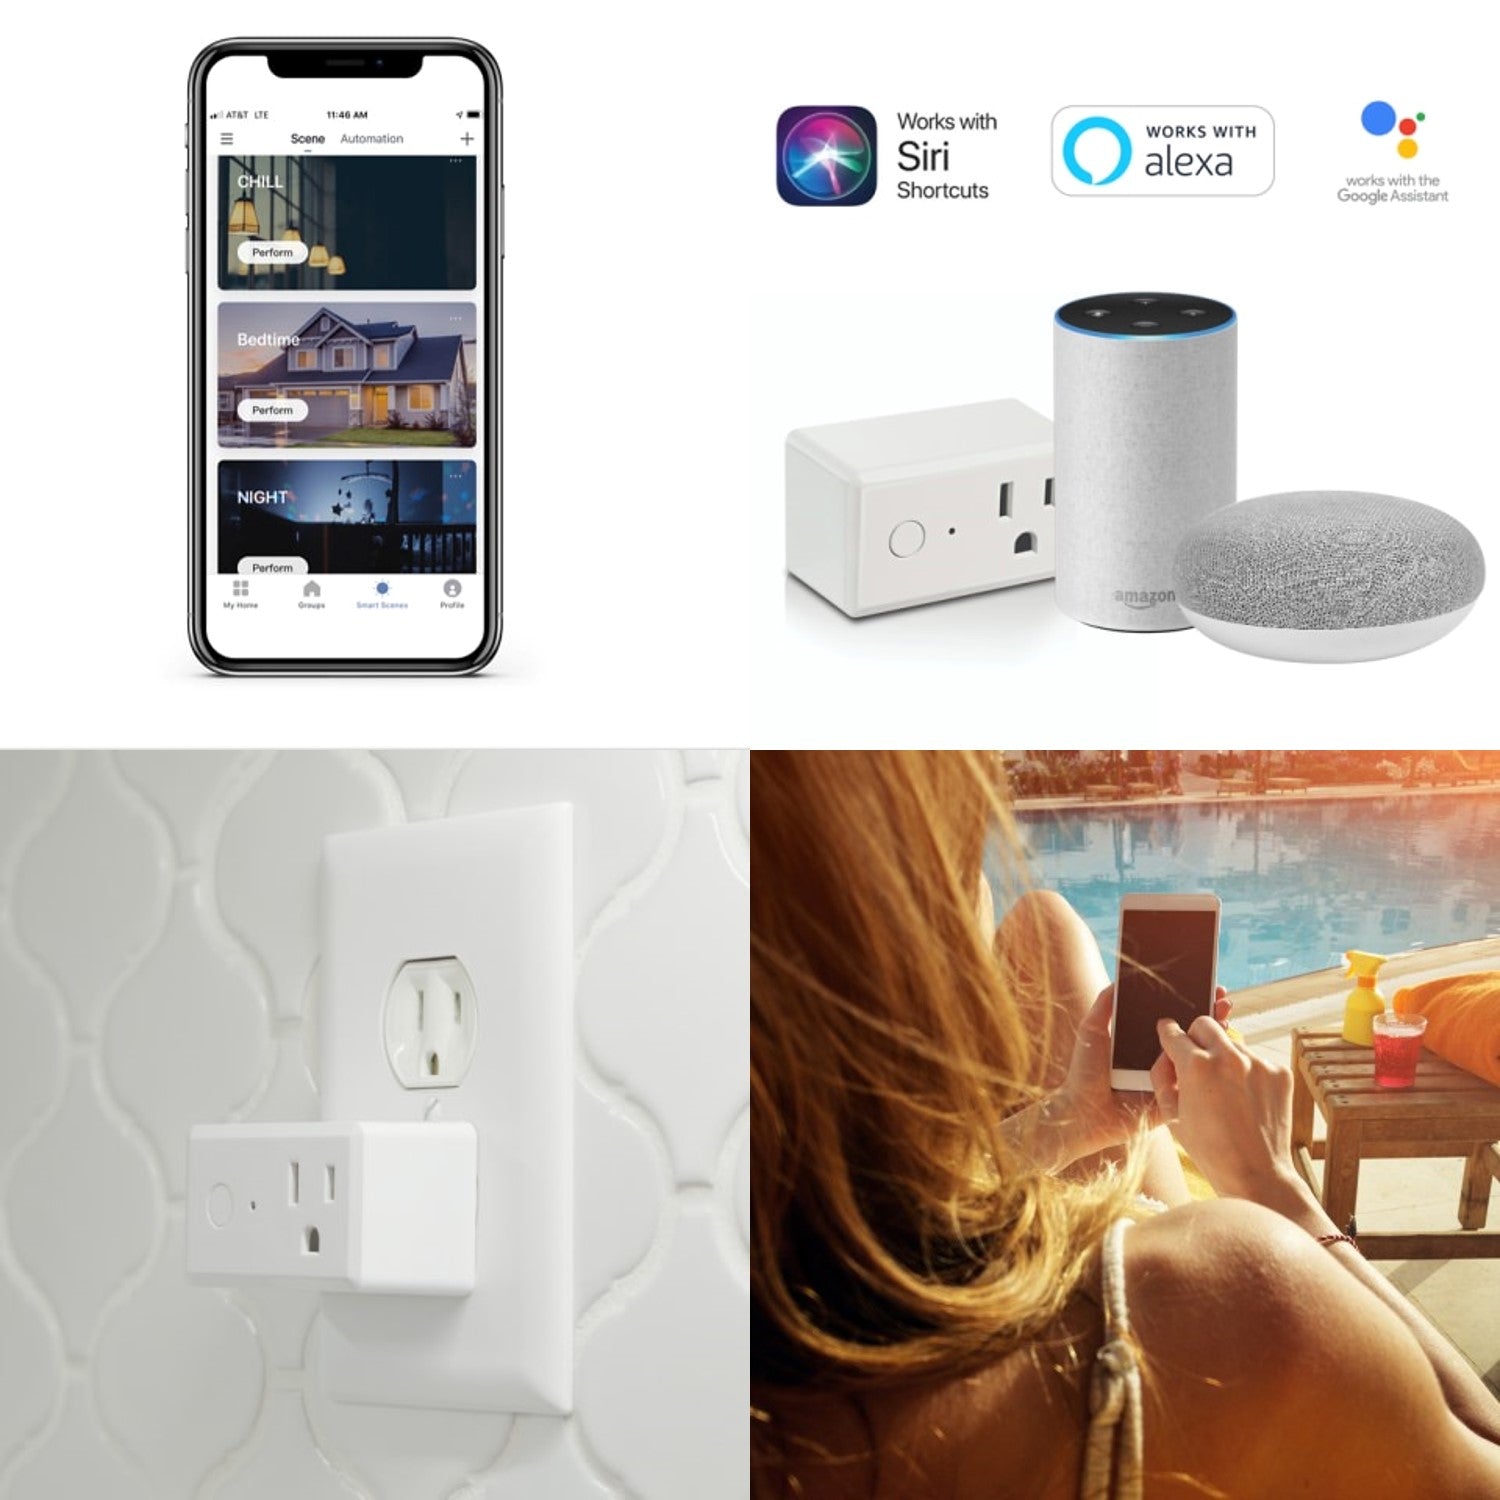 Feit Electric Smart Plug, WiFi Plug Works with Alexa and Google Home,  Indoor Plug, No Hub Required, 2.4Ghz Network, Remote Control from Anywhere,  15